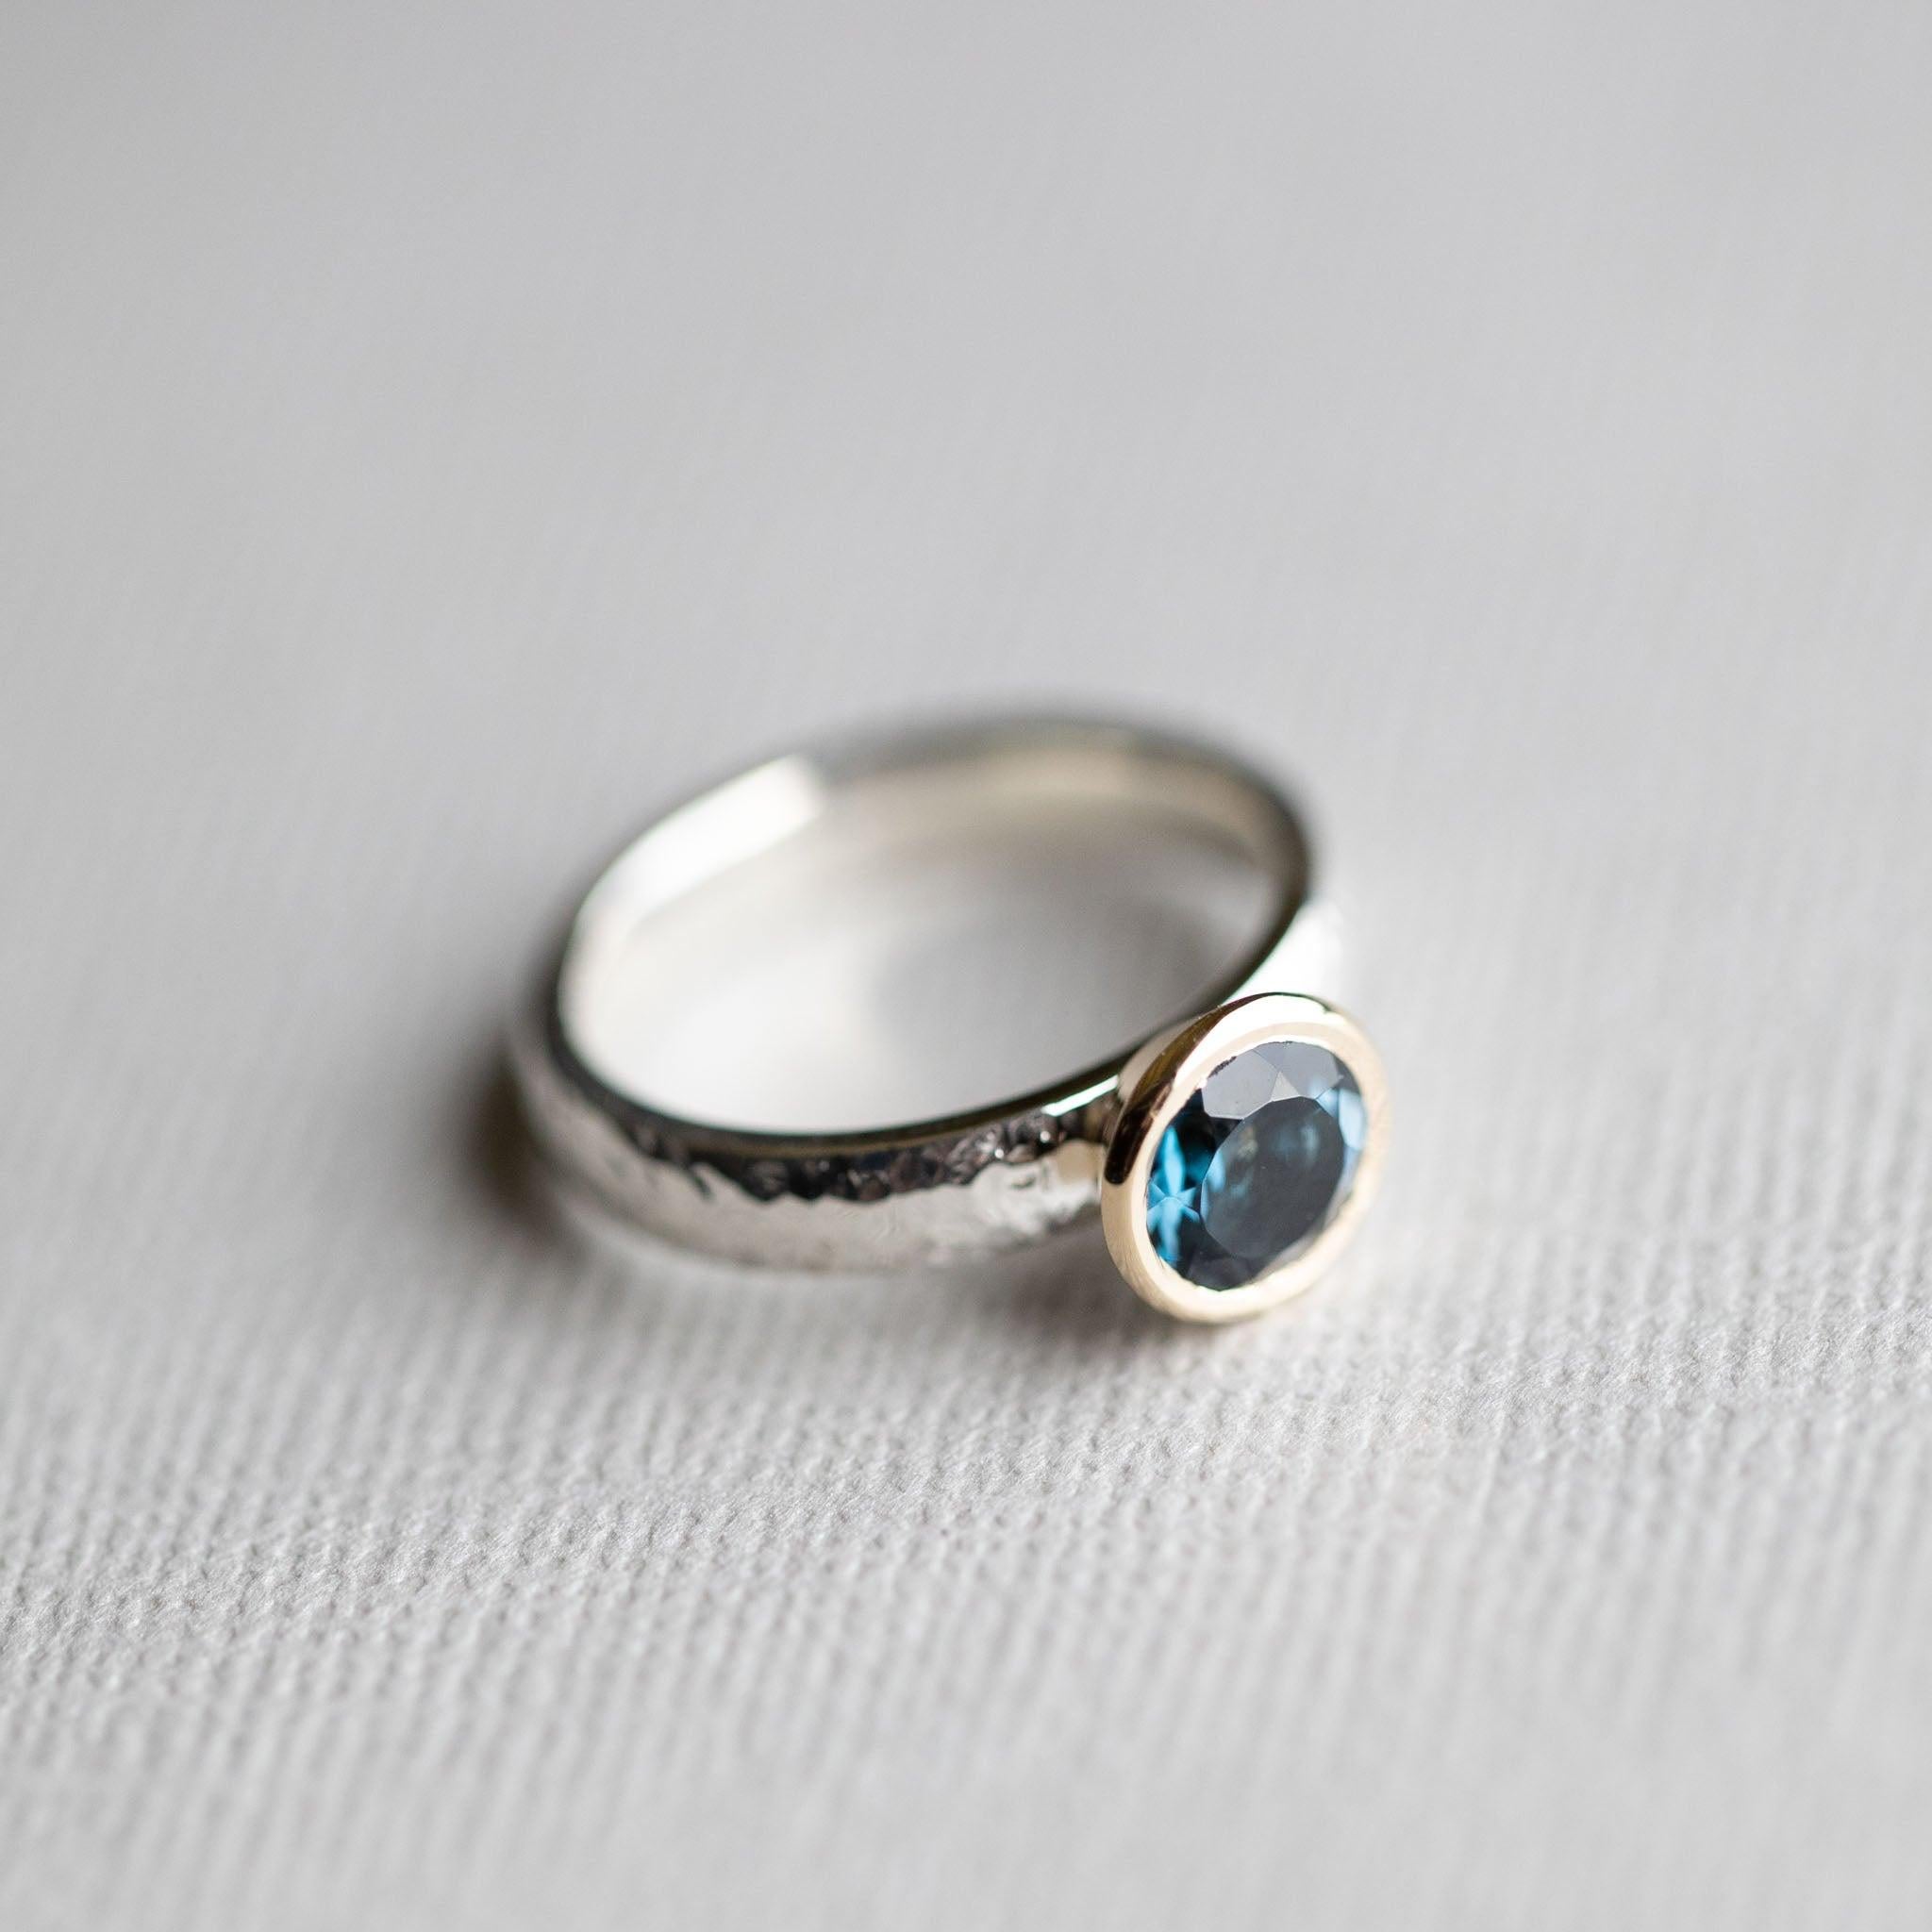 For Sale:  Two Tone Hammered Ring, London Topaz Ring, 14k Bezel Gold with Sterling Silver 9